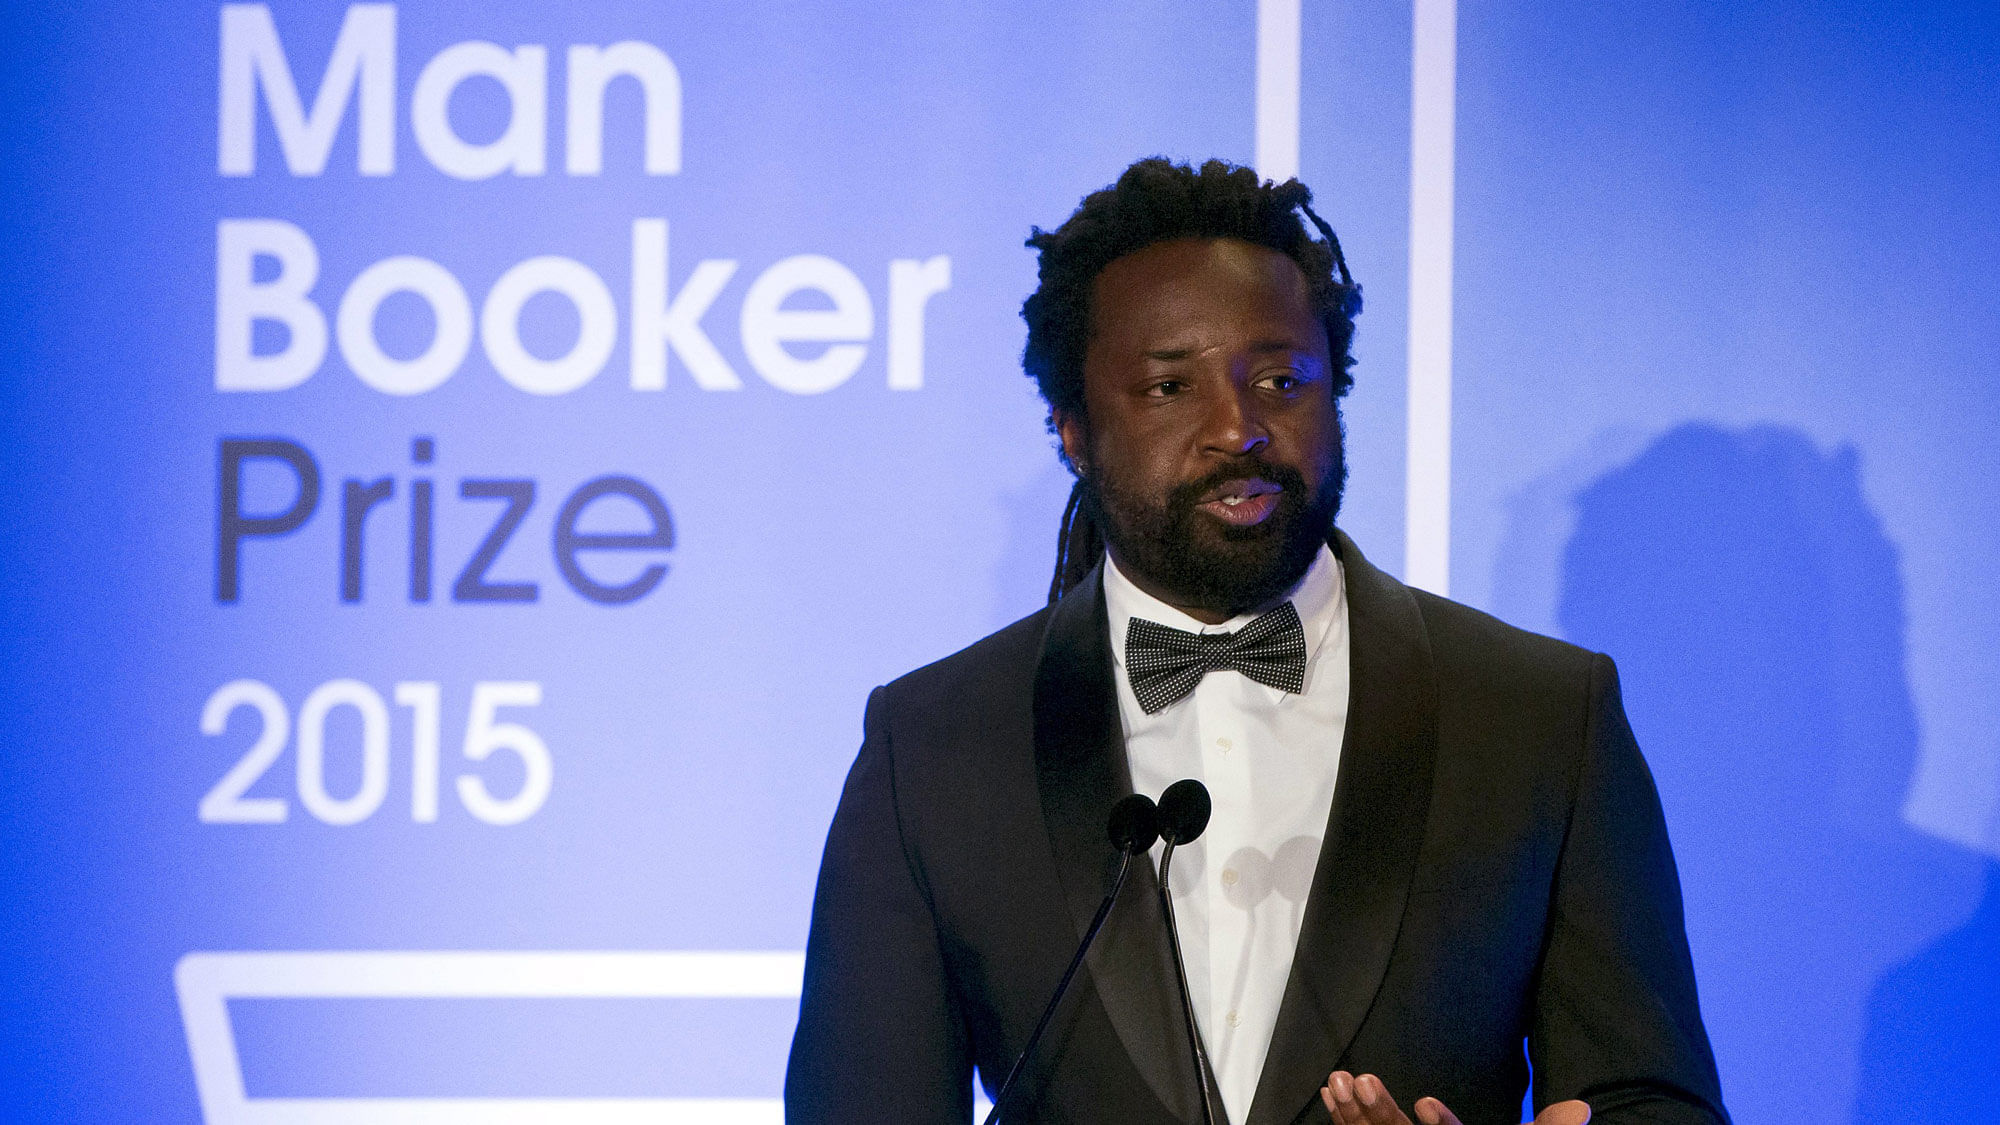 Marlon James, author of <i>A Brief History of Seven Killings</i>, speaks after being named the winner of the Man Booker Prize for Fiction 2015. Marlon James became the first Jamaican to win this prestigious award. (Photo: AP)